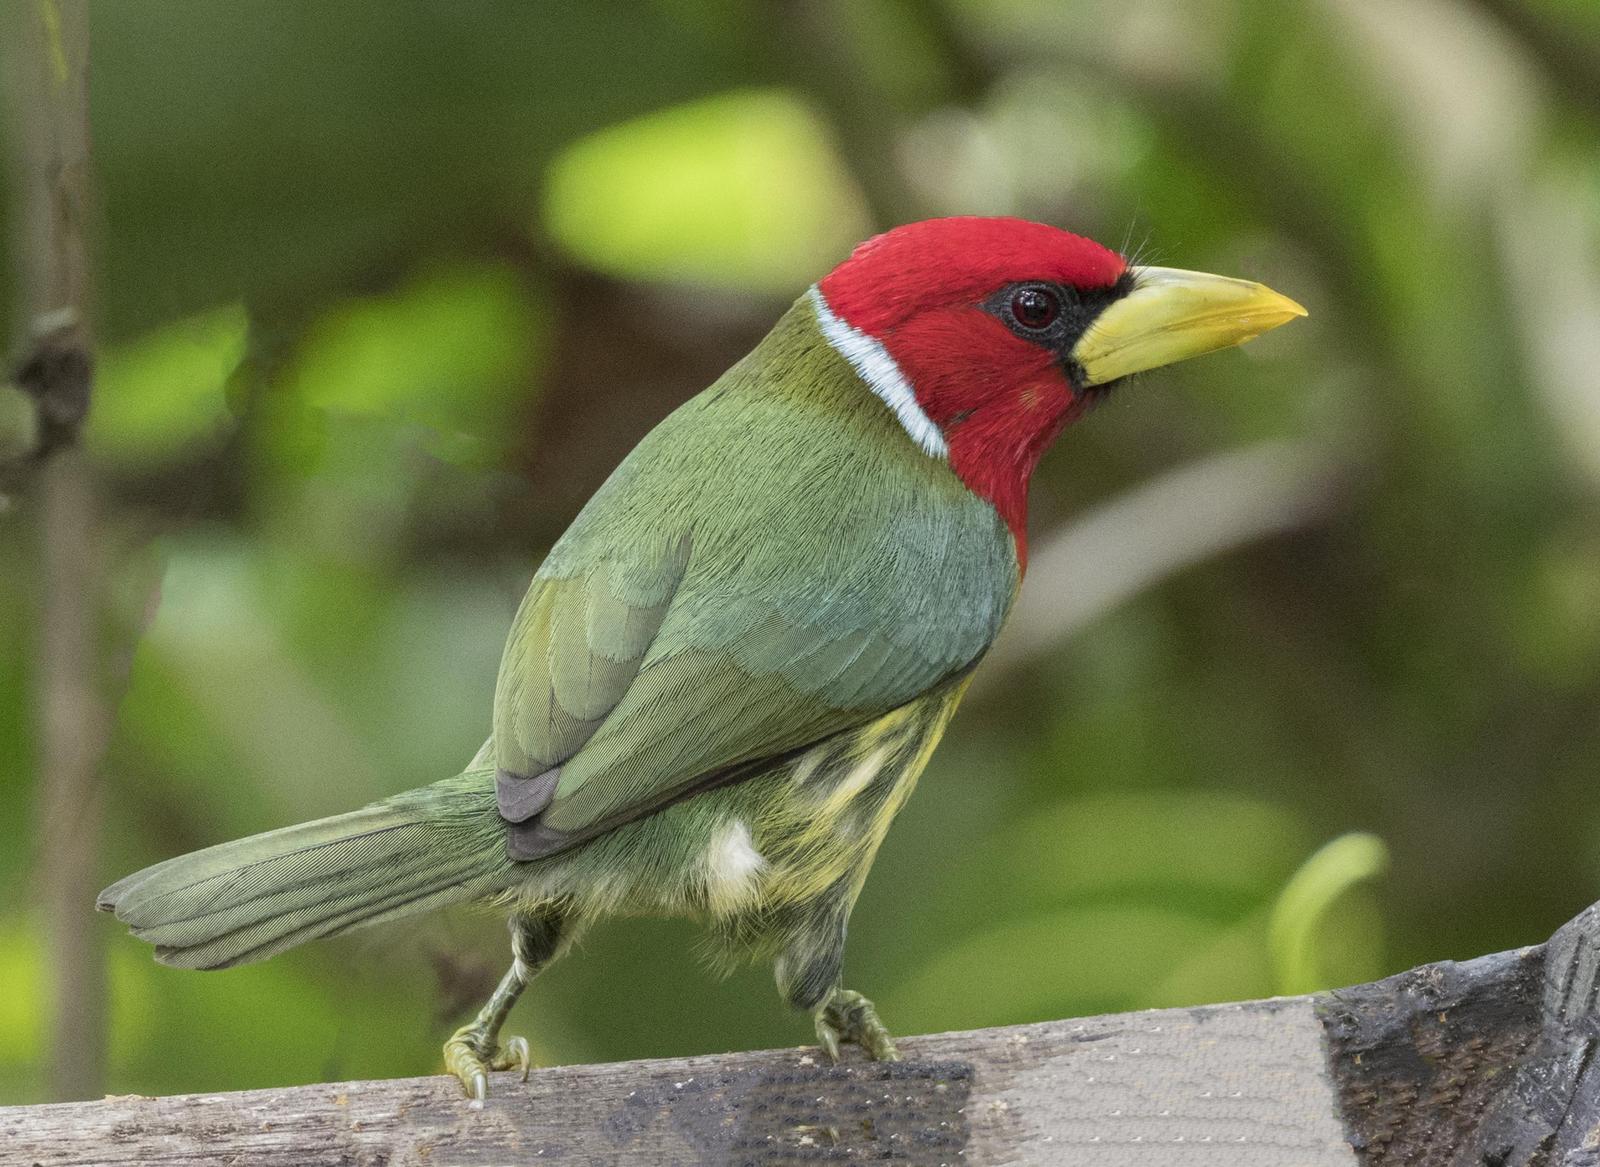 Red-headed Barbet Photo by Mike Liskay